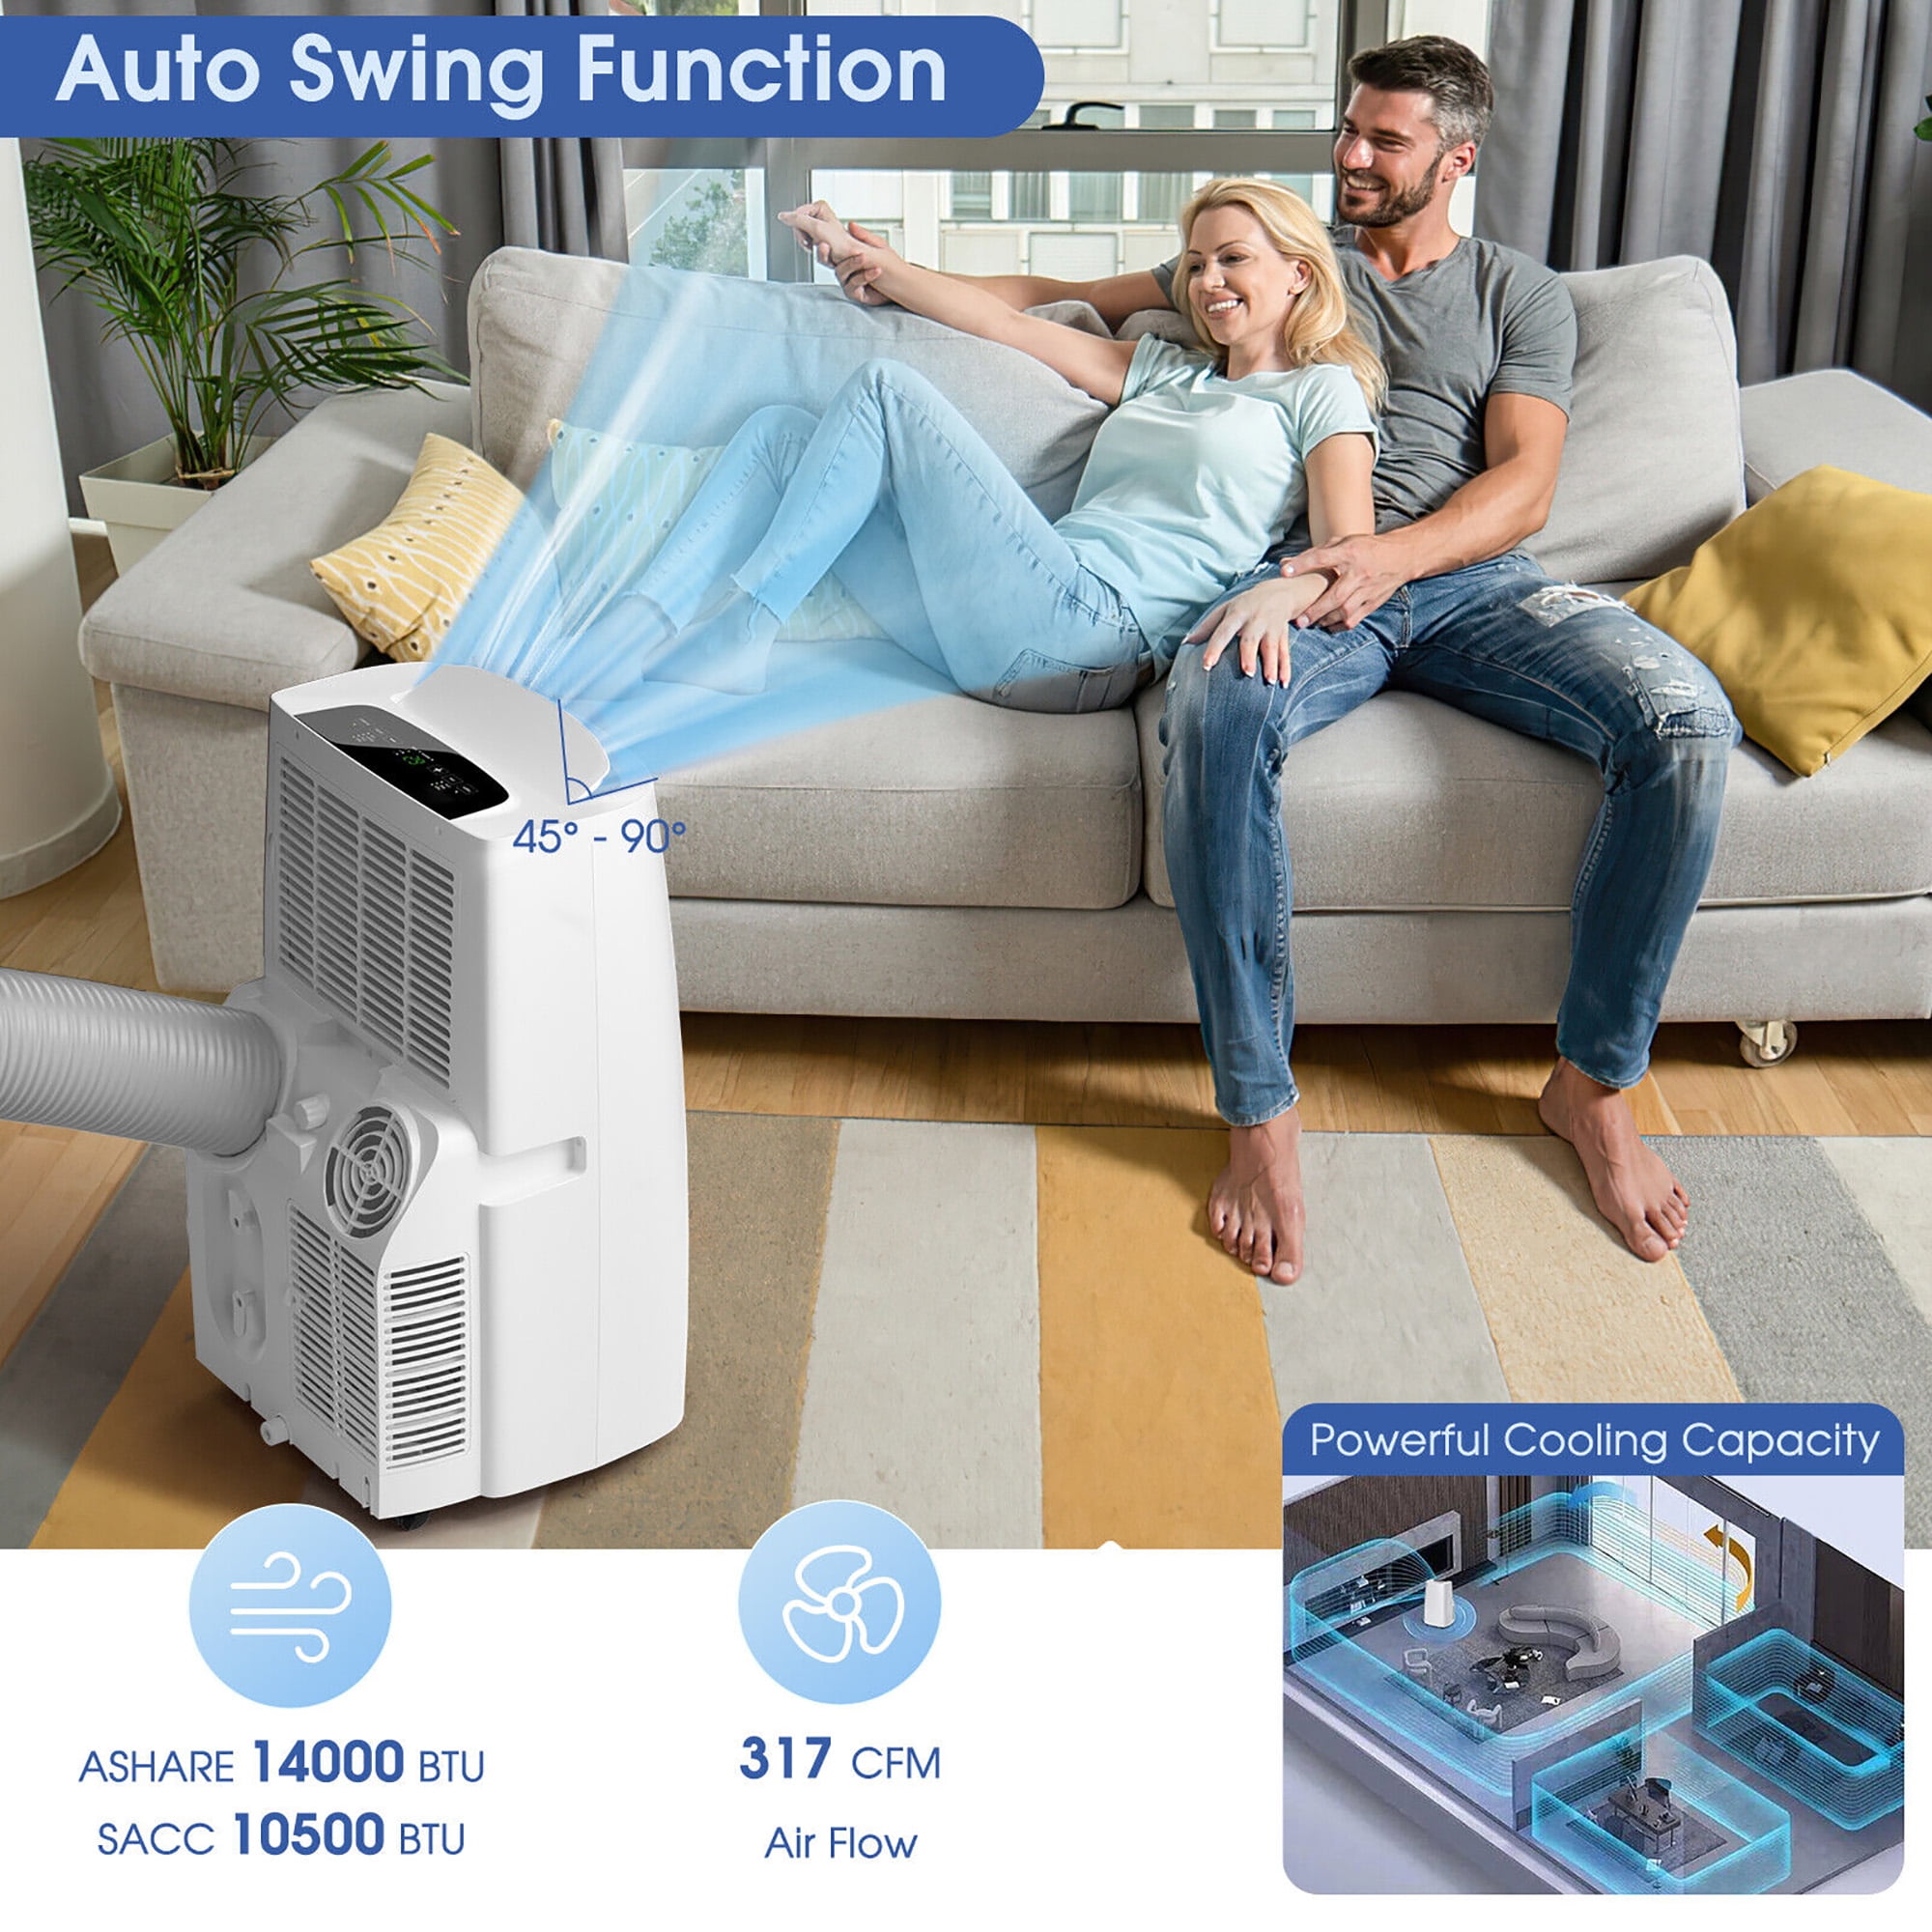 BLACK+DECKER 14,000 BTU Portable White Air Conditioner with Remote Control   Midsummer Madness! Unbelievable Deals Await! POOLS! Water Park! Mini  Split AC, Porch Swings, Nordic Track Treadmill, Patio Furniture, Foosball  Table, Popcorn